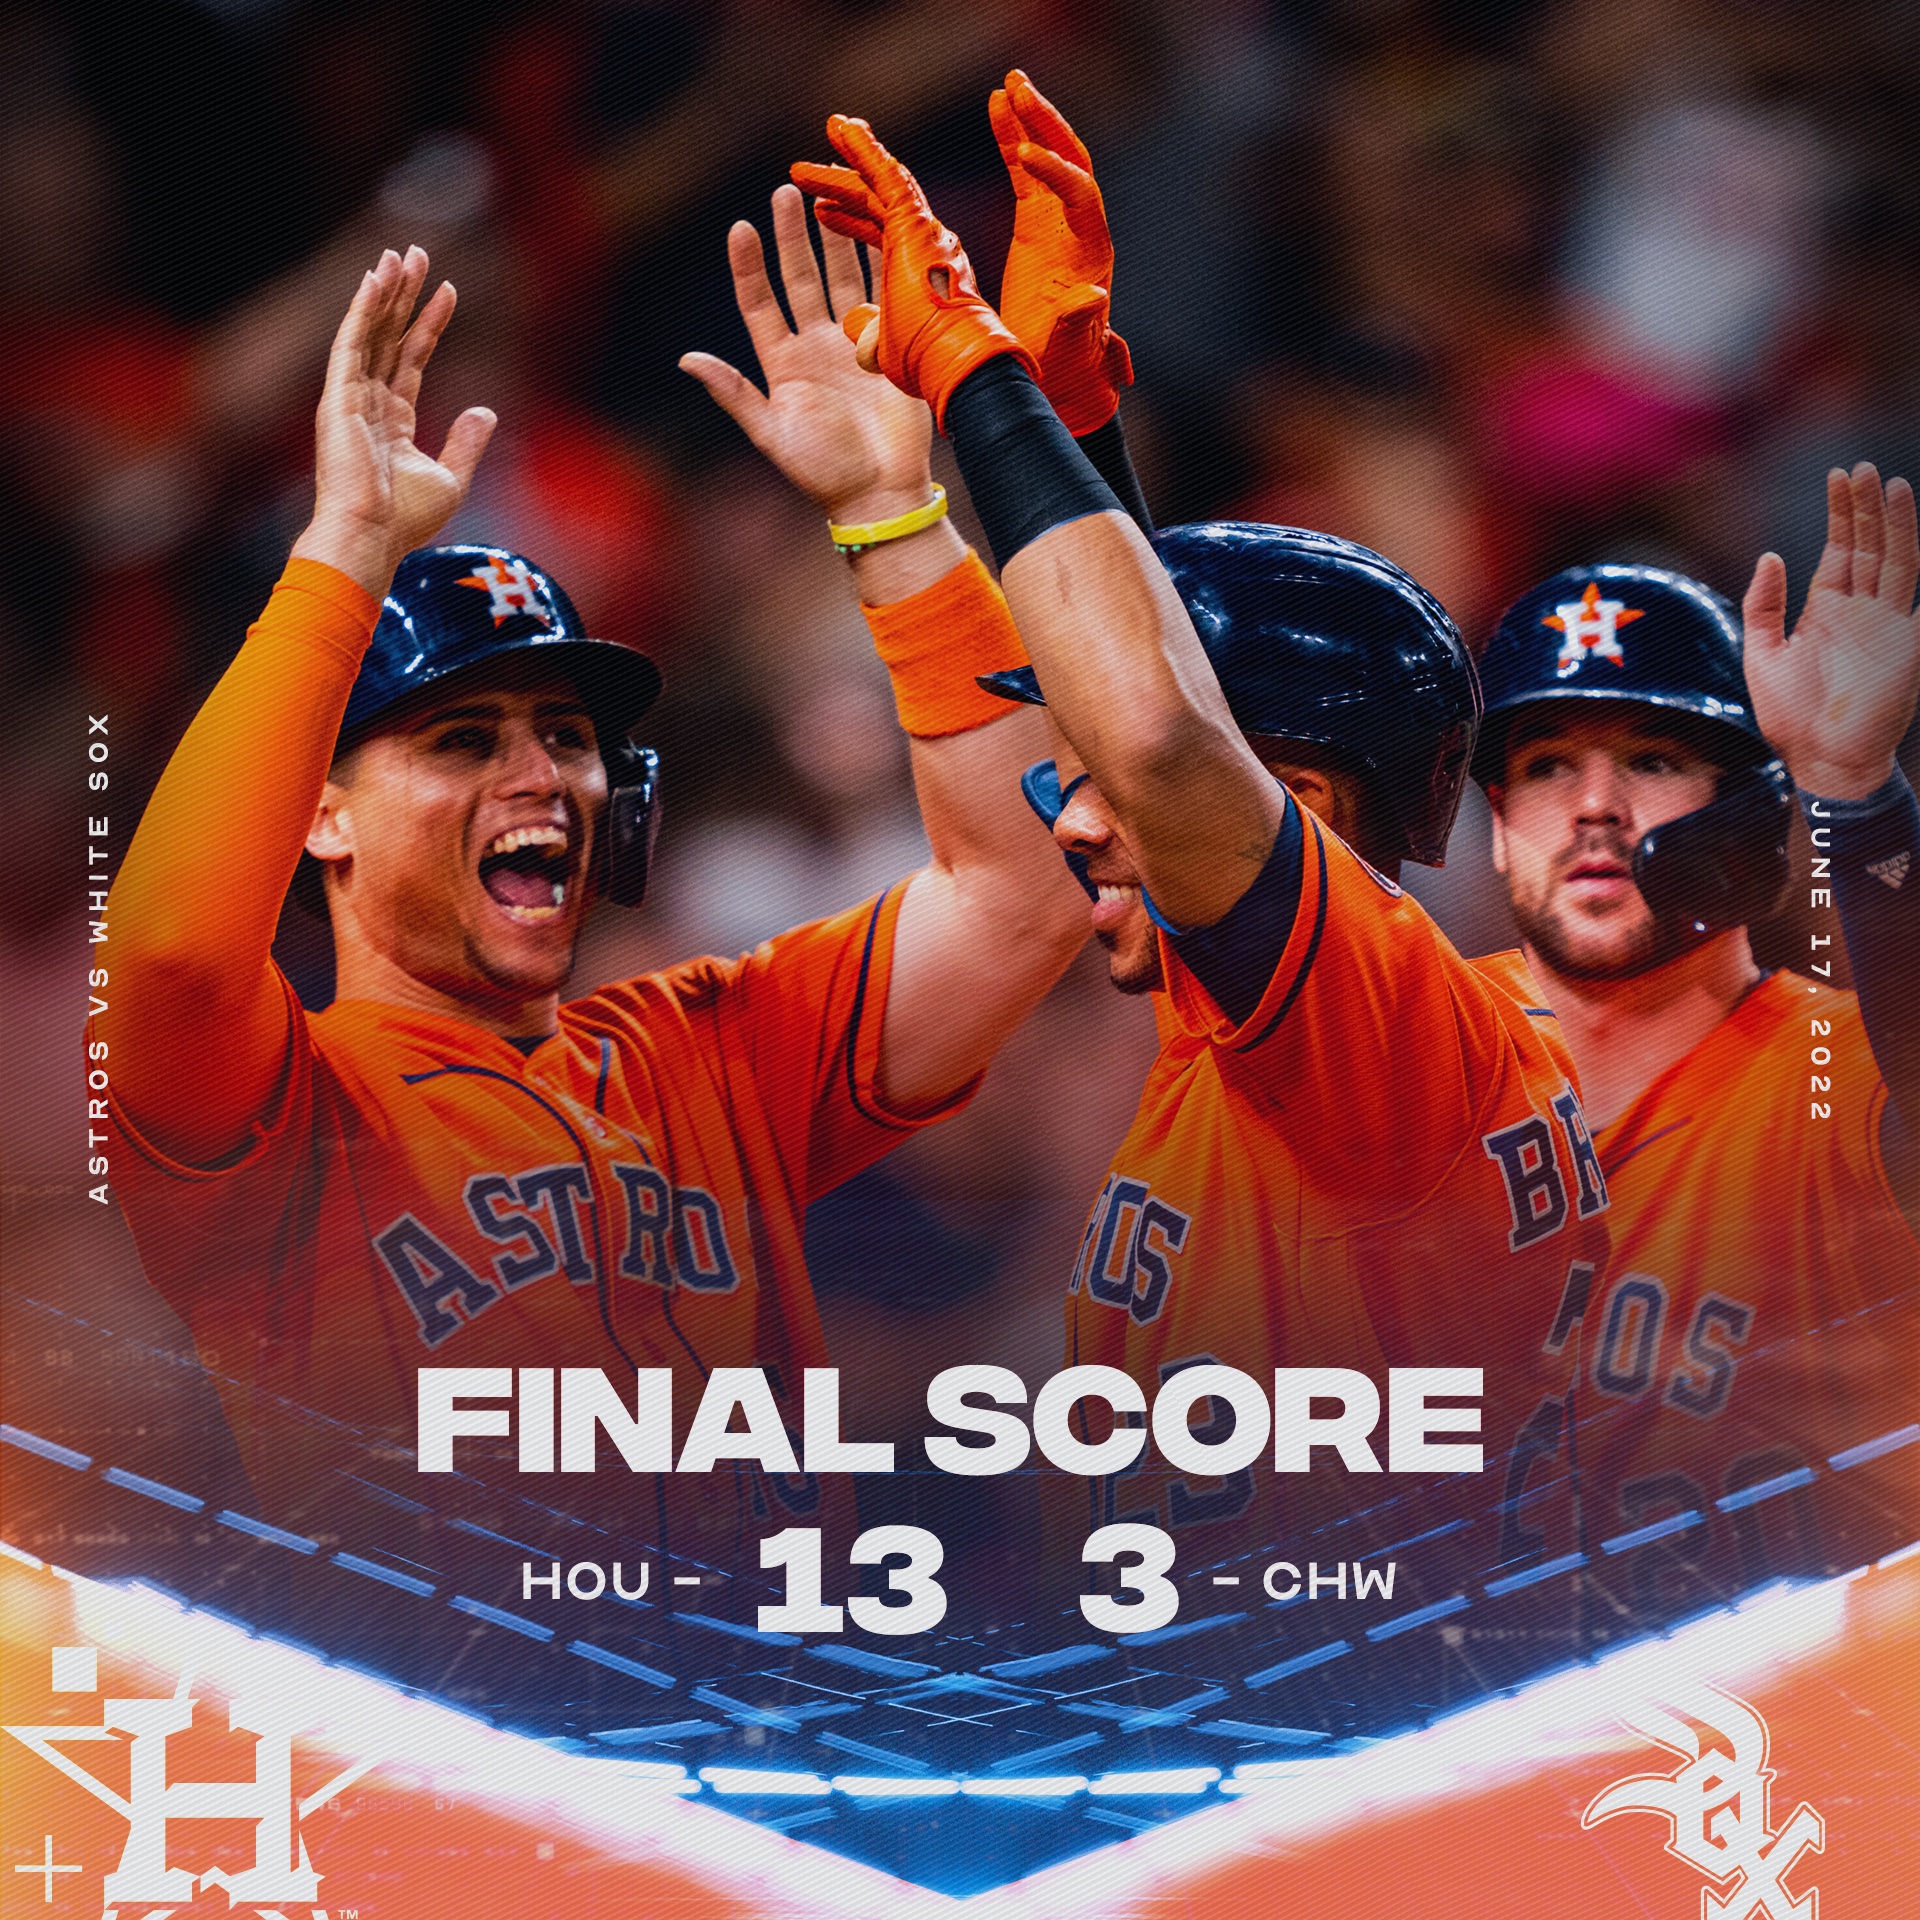 More throwbacks courtesy of the Astros twitter account : r/Astros